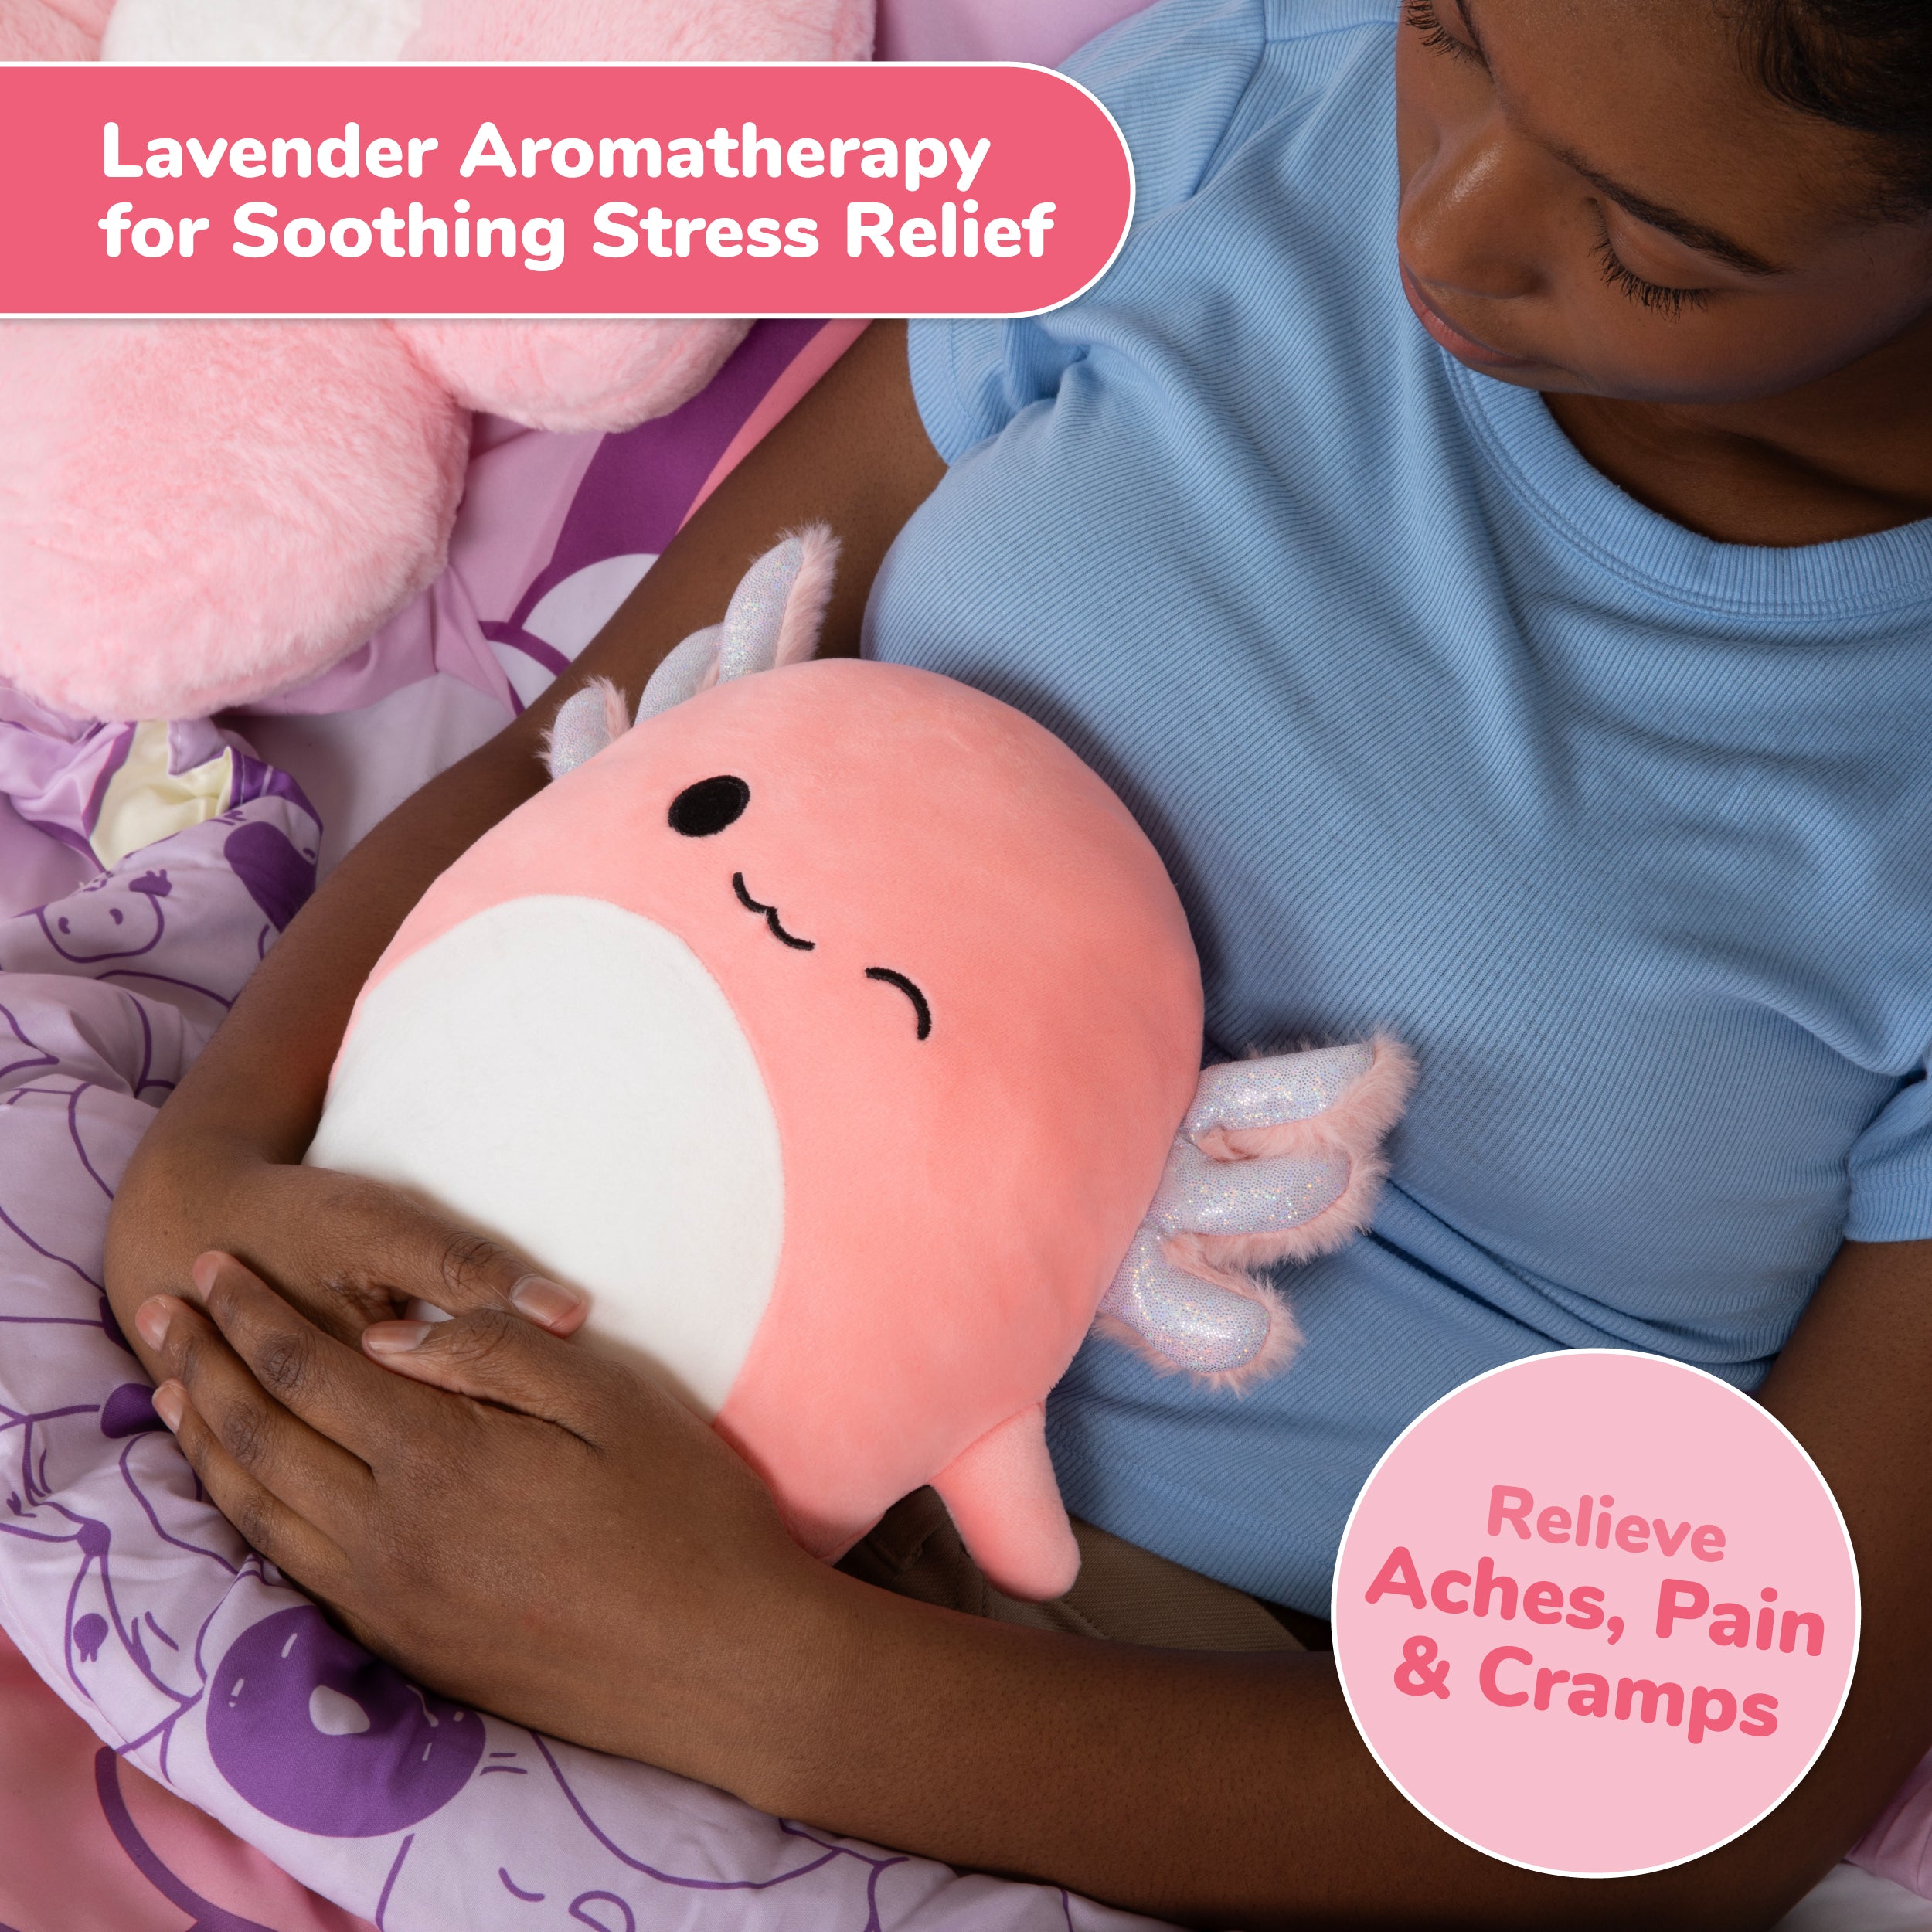 Squishmallows Archie the Axolotl Heating Pad